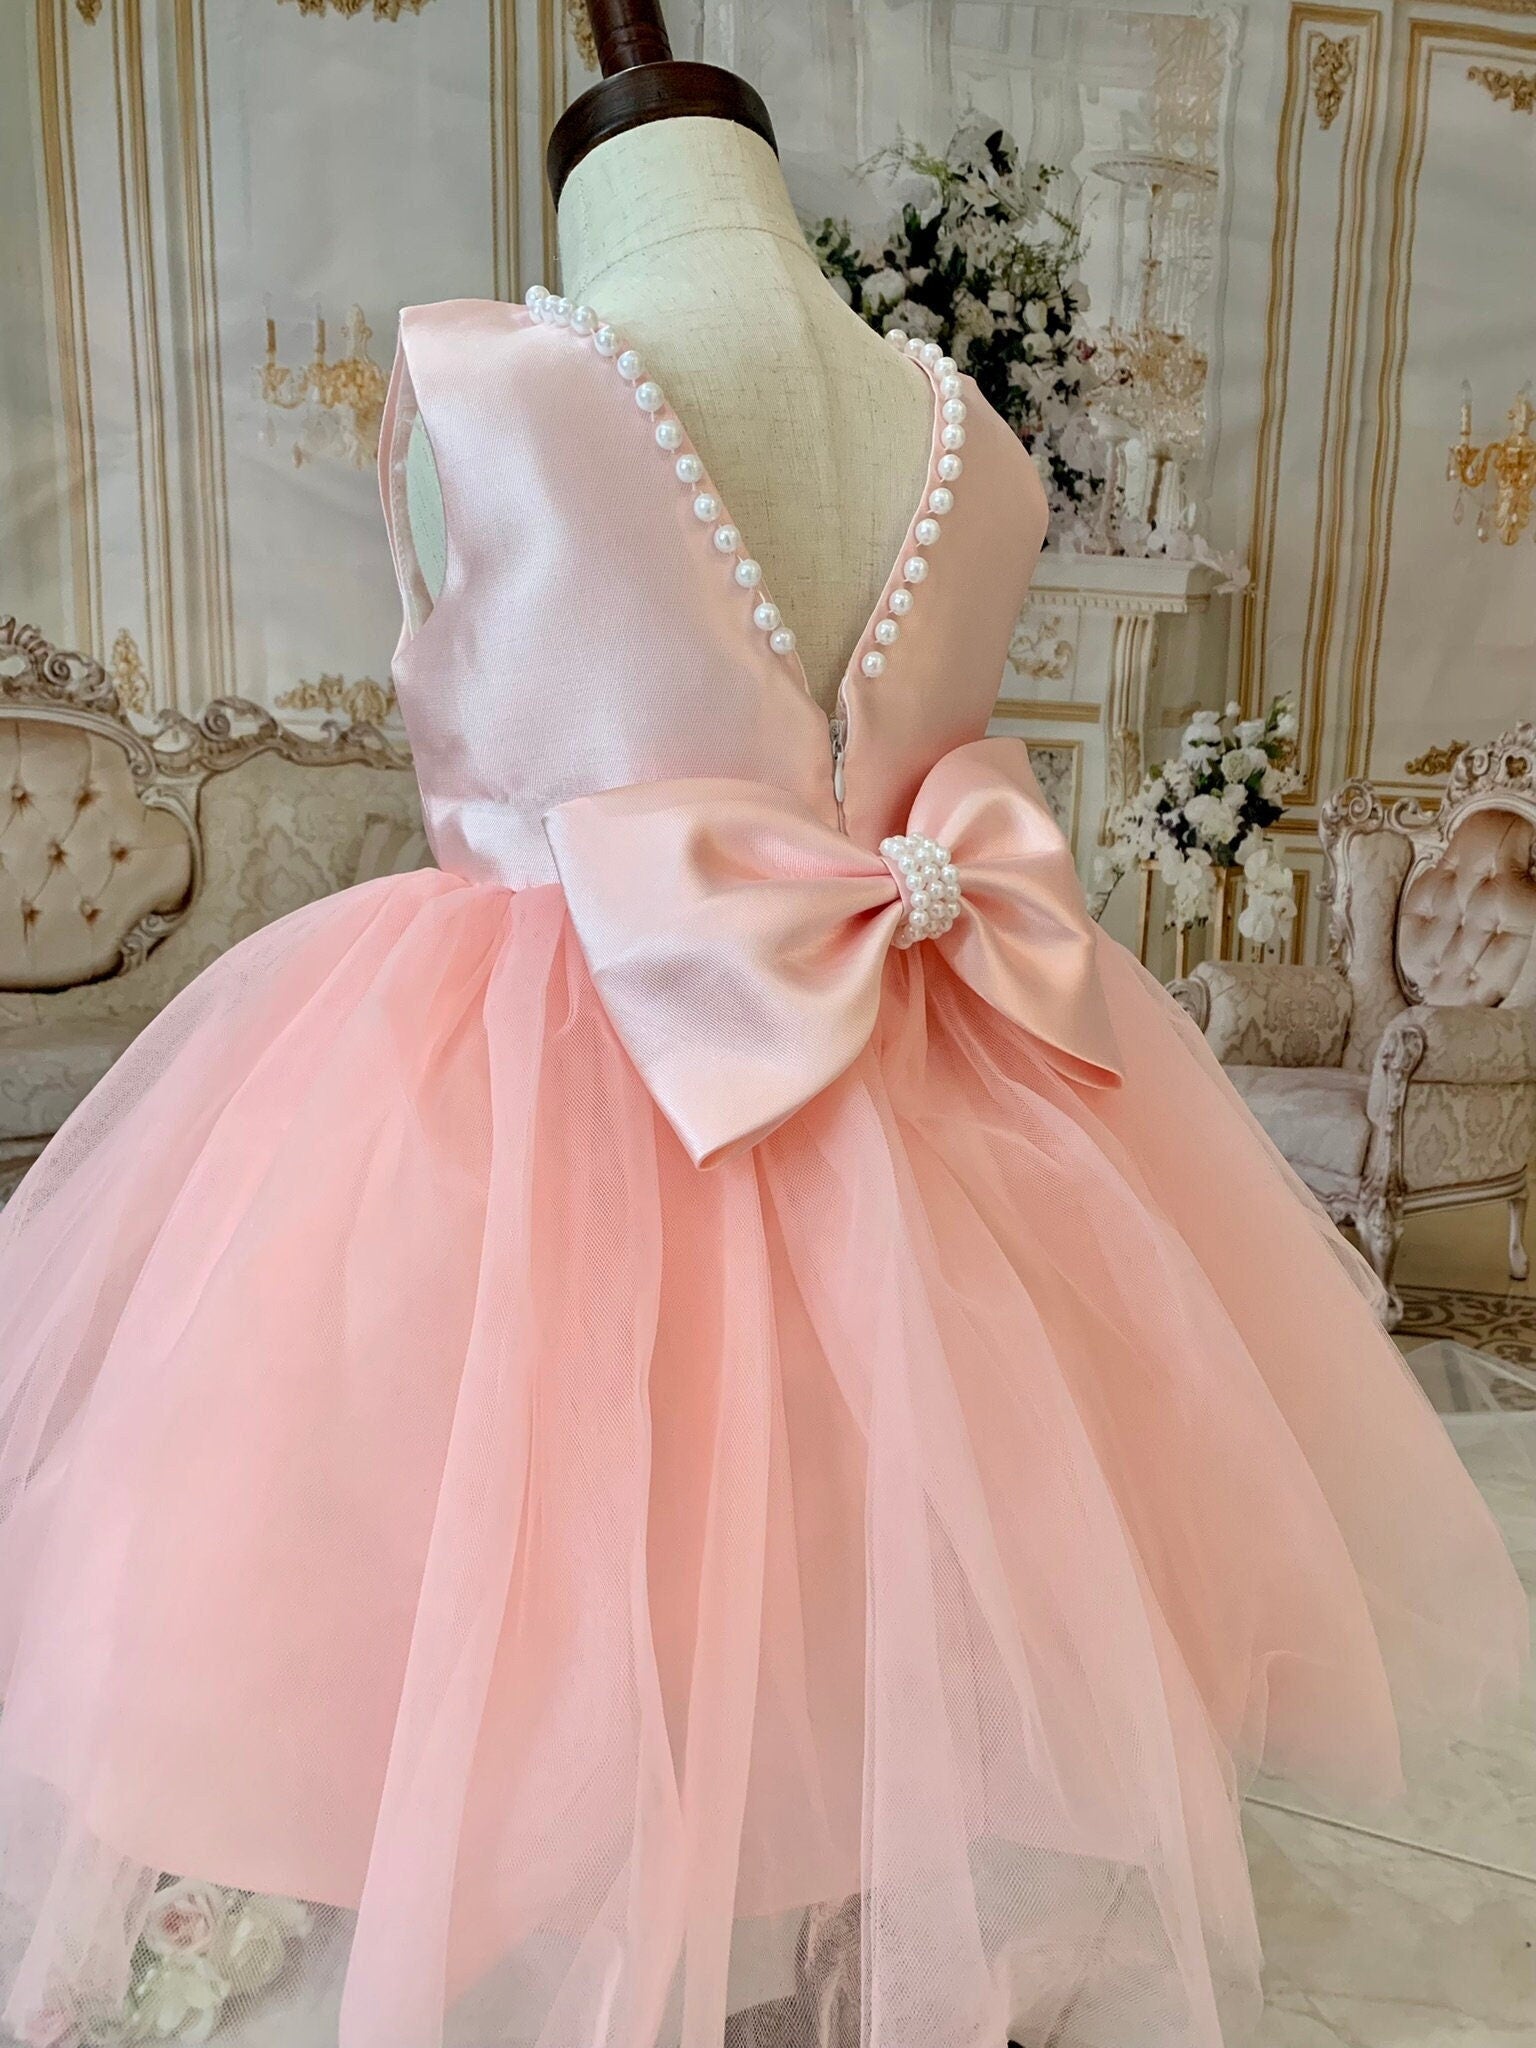 Soft Pink Baby Girl Tulle Pearl Dress - Birthday Dress - TinySweetPeaBoutique